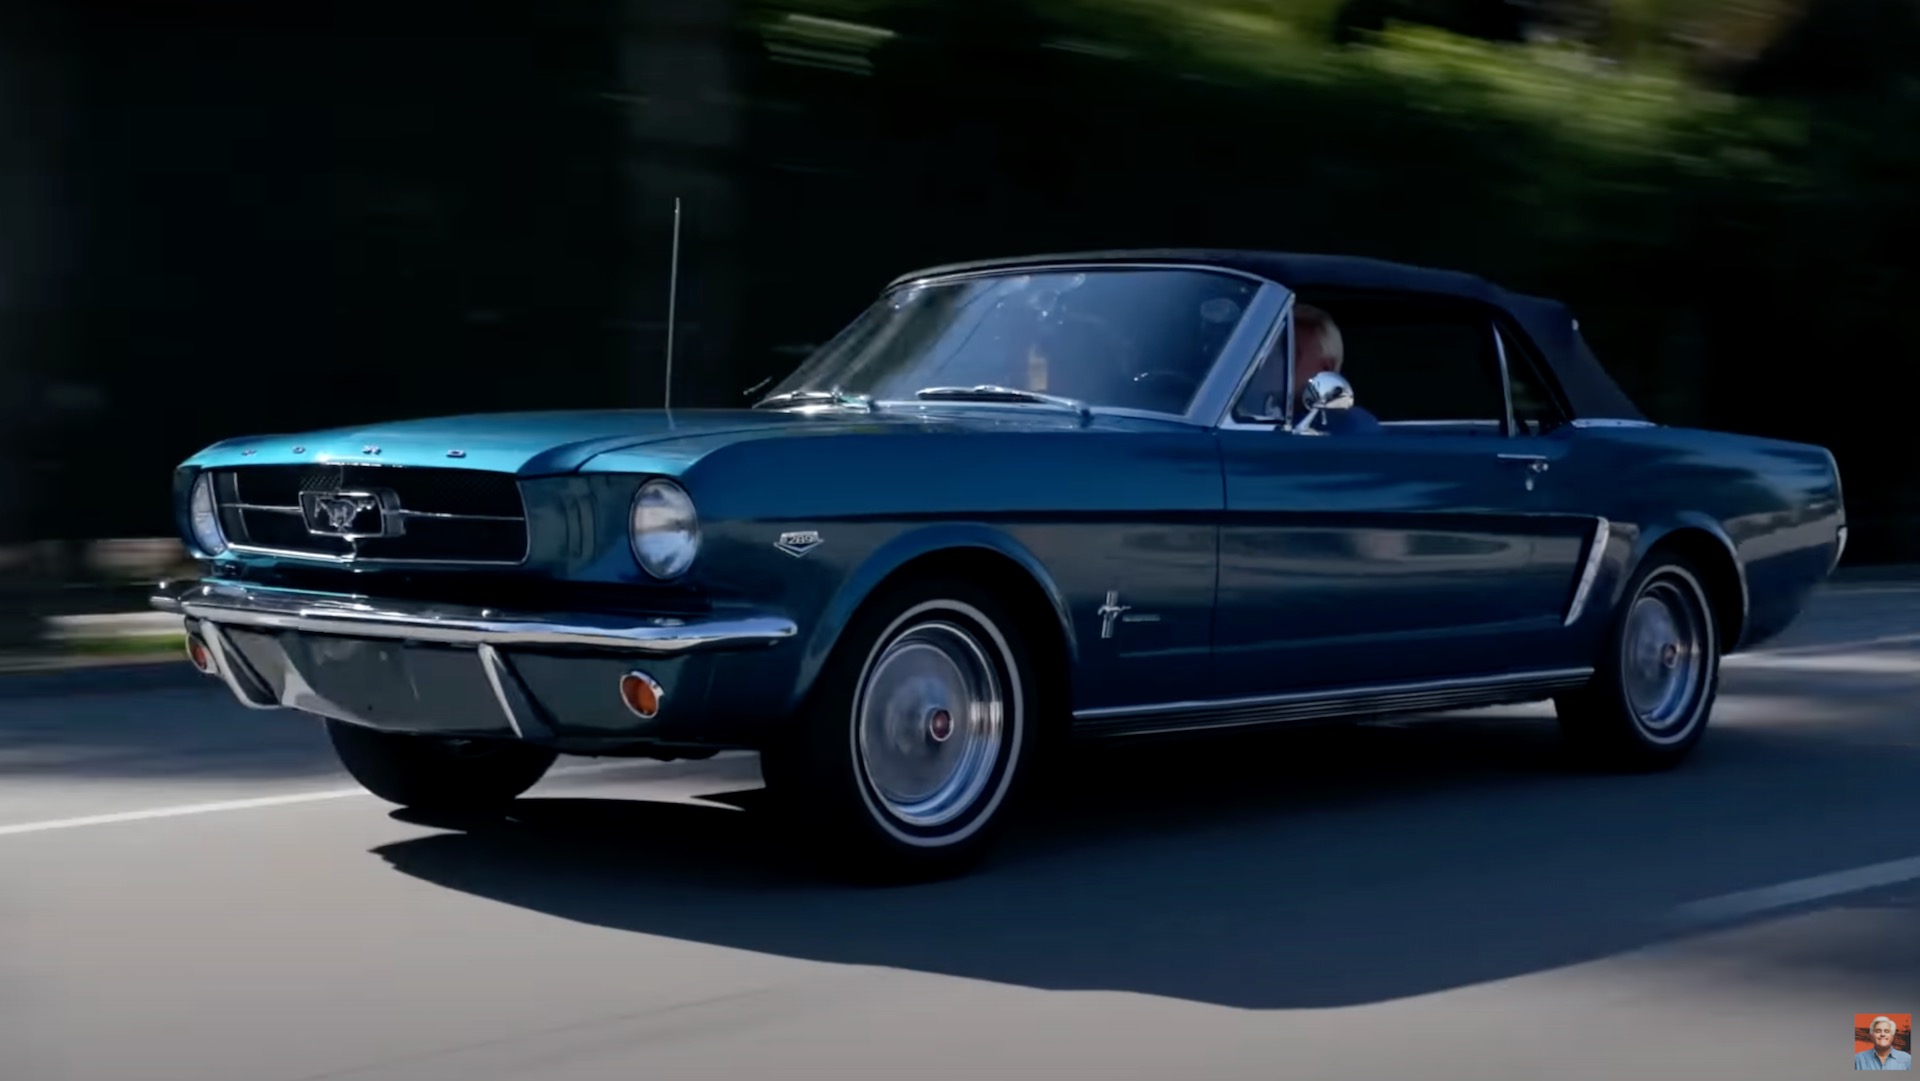 Jay Leno checks out a restored Ford Mustang K-Code